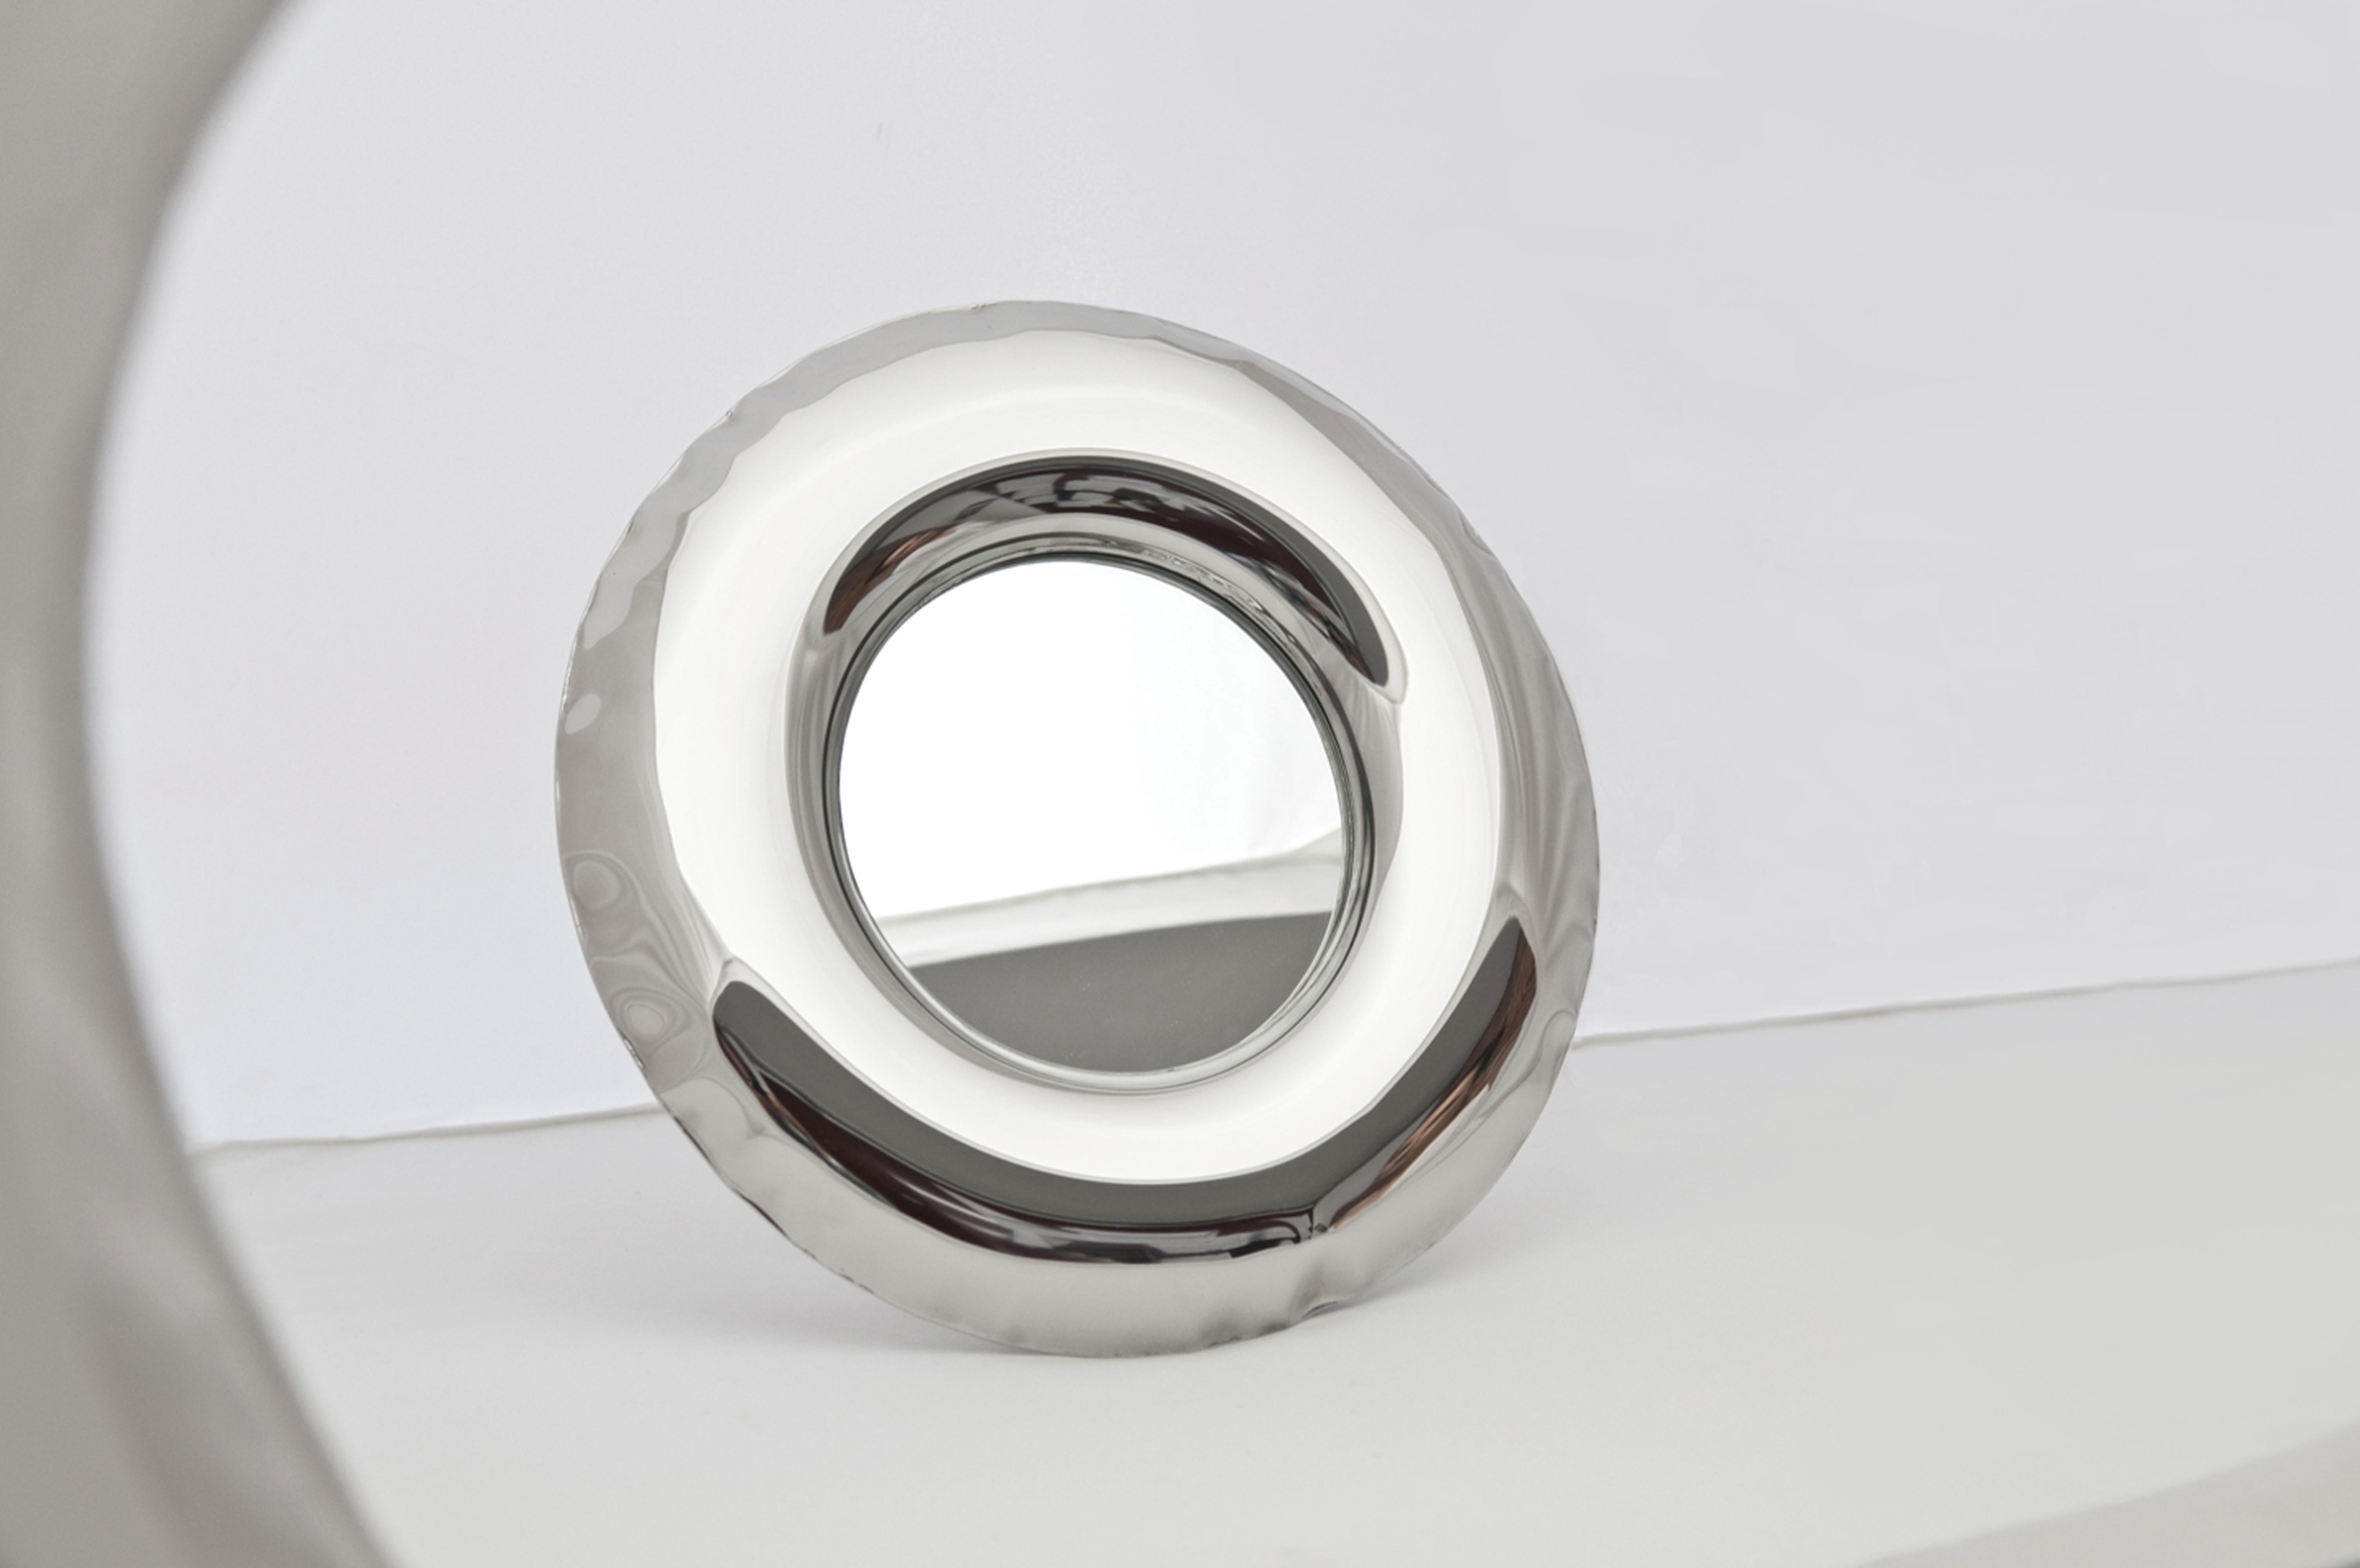 Rondel mirror is a unique object where steel and glass merge into a single entity which is a reflection of the innovative FiDU technology.
The product is designed for beauty salons, opticians, luxurious, chic boutiques and for private use.